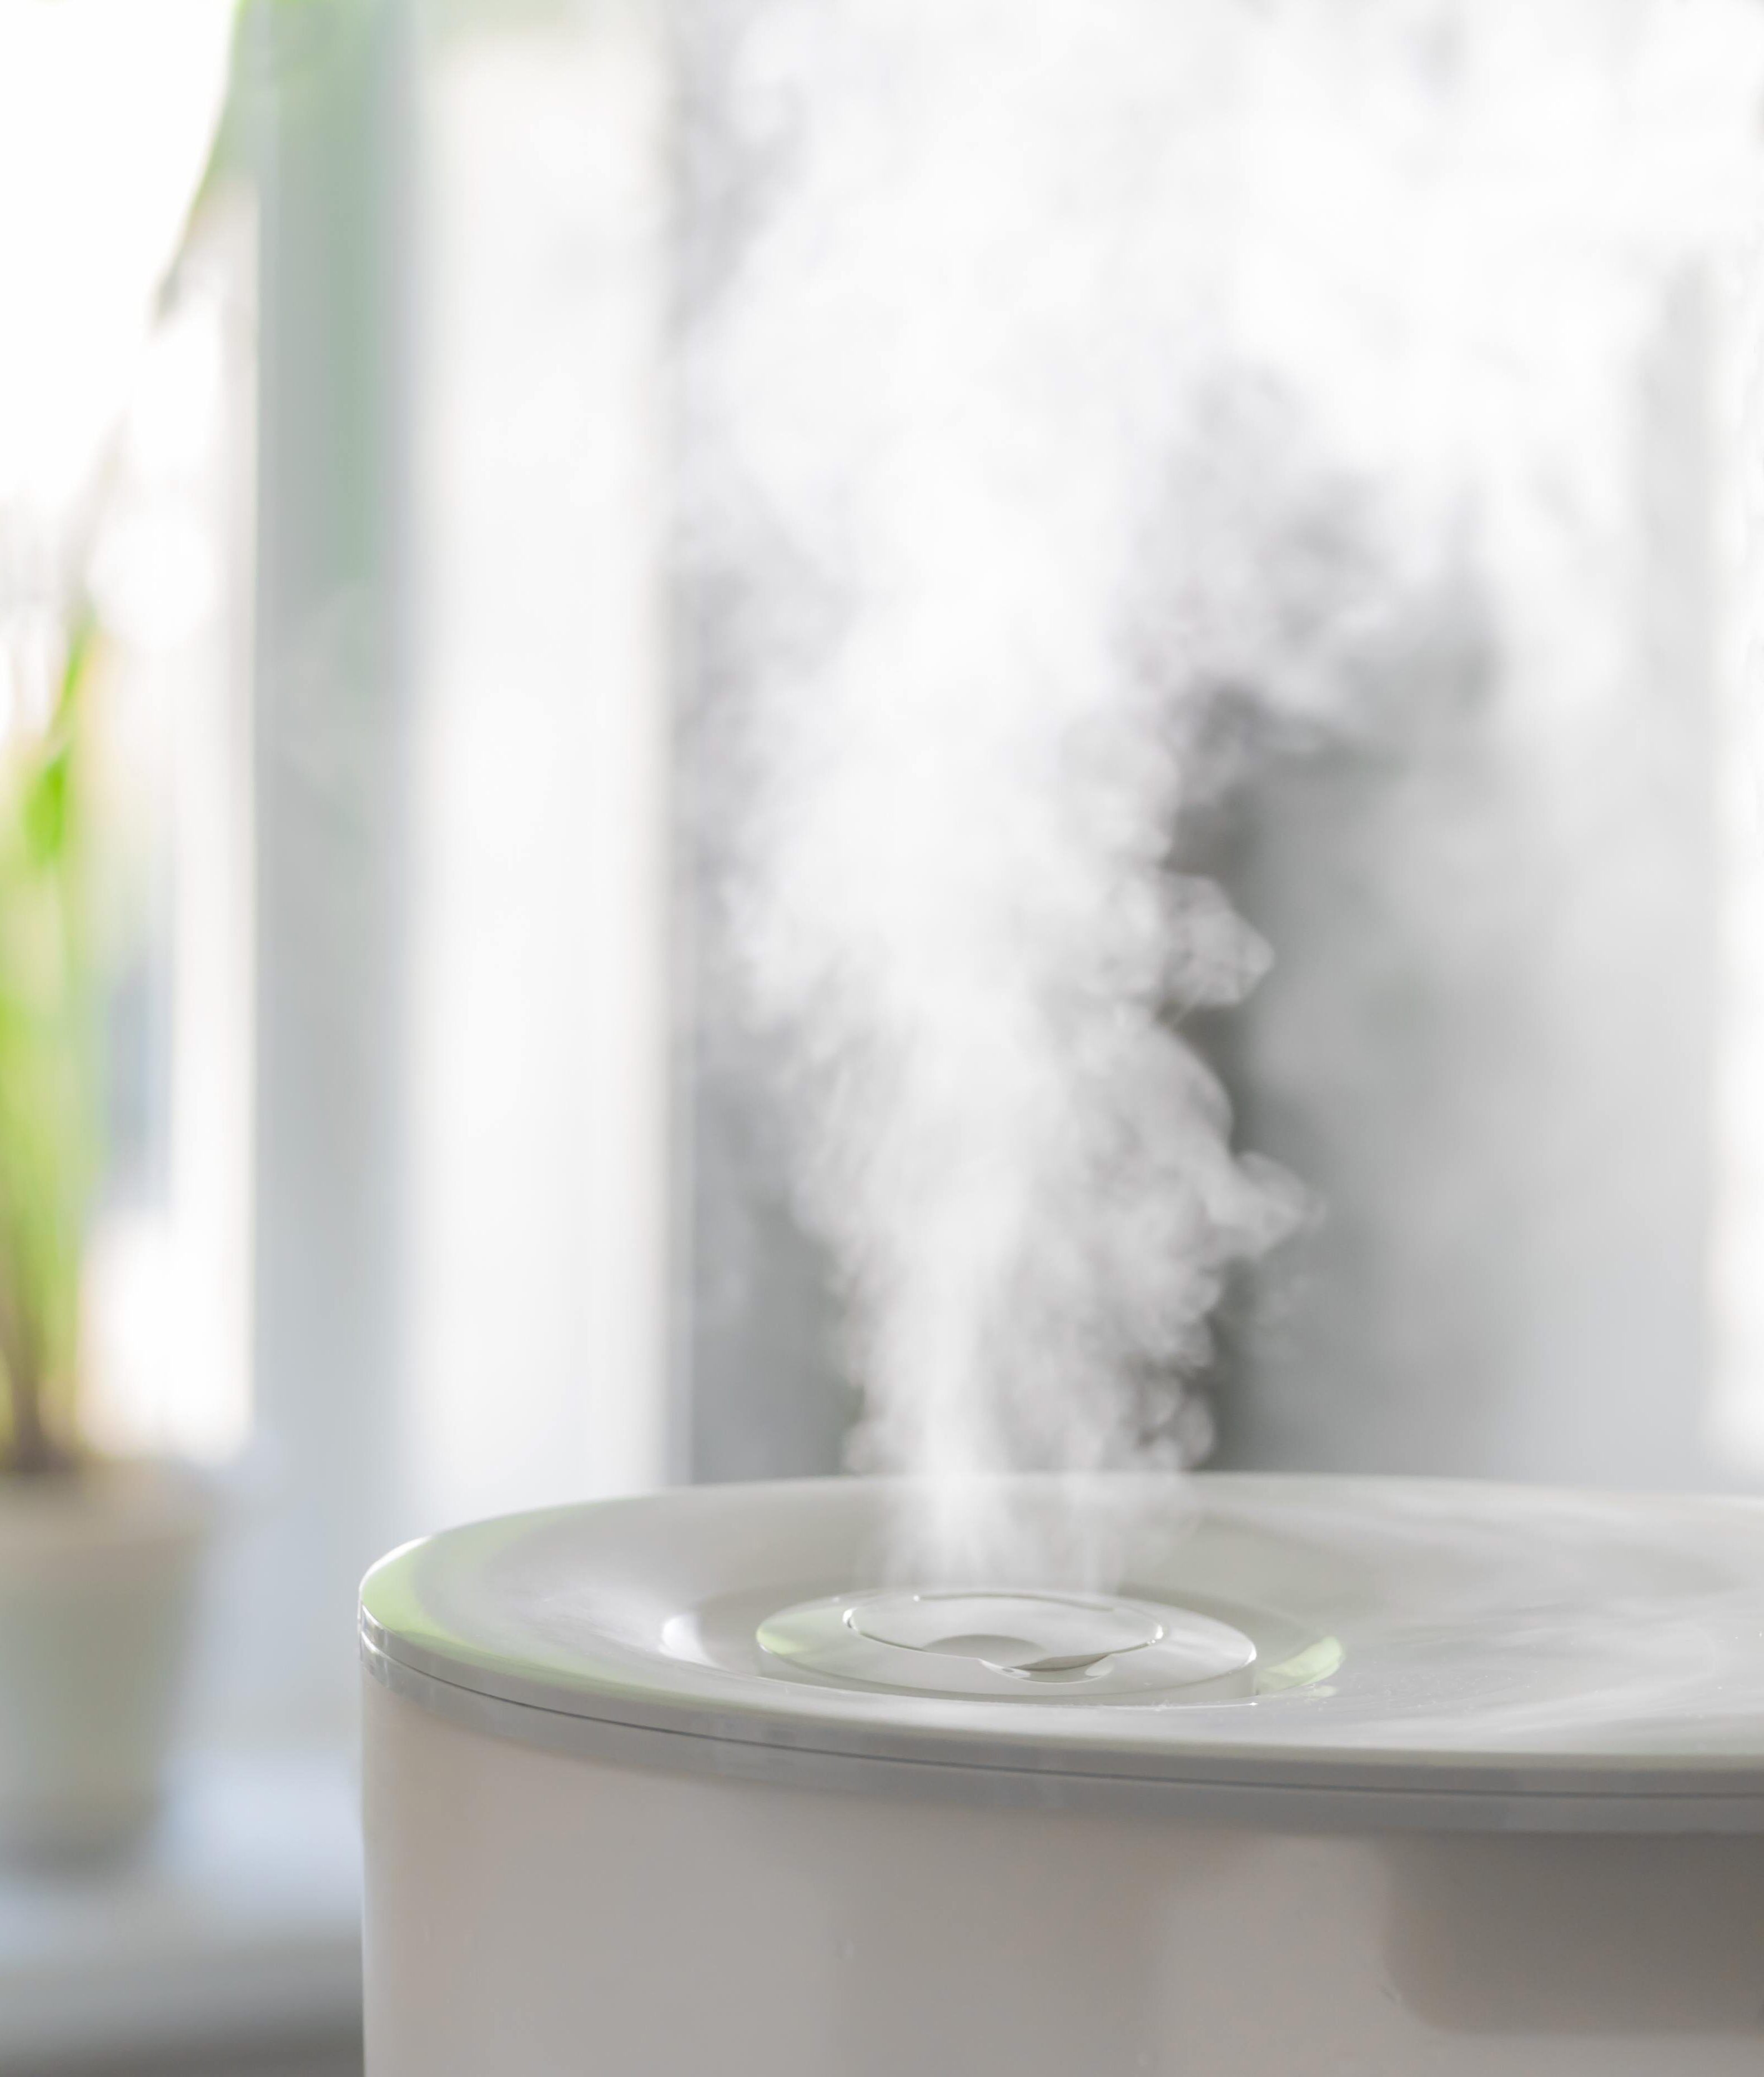 Vapor from humidifier in front of window